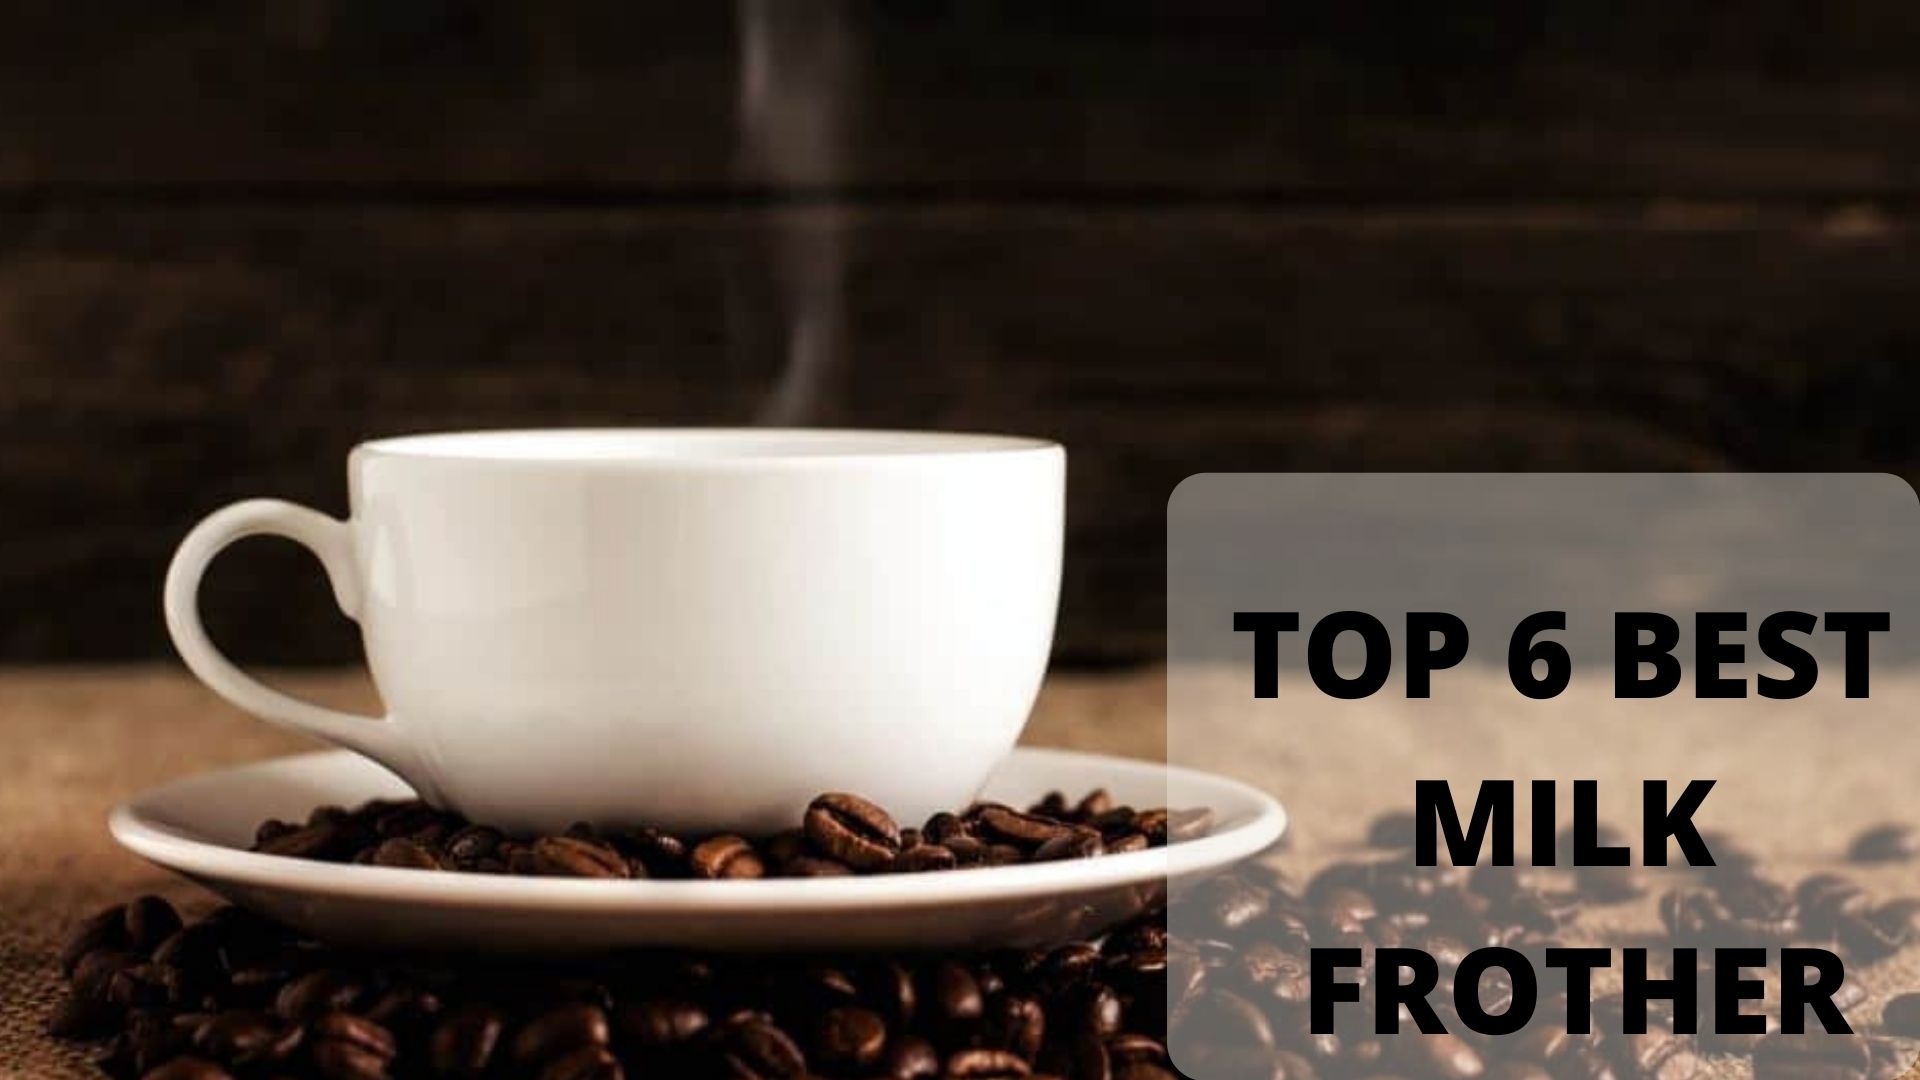 The 6 Best Milk Frother 0f 2023 – Number 4 Will Shock You